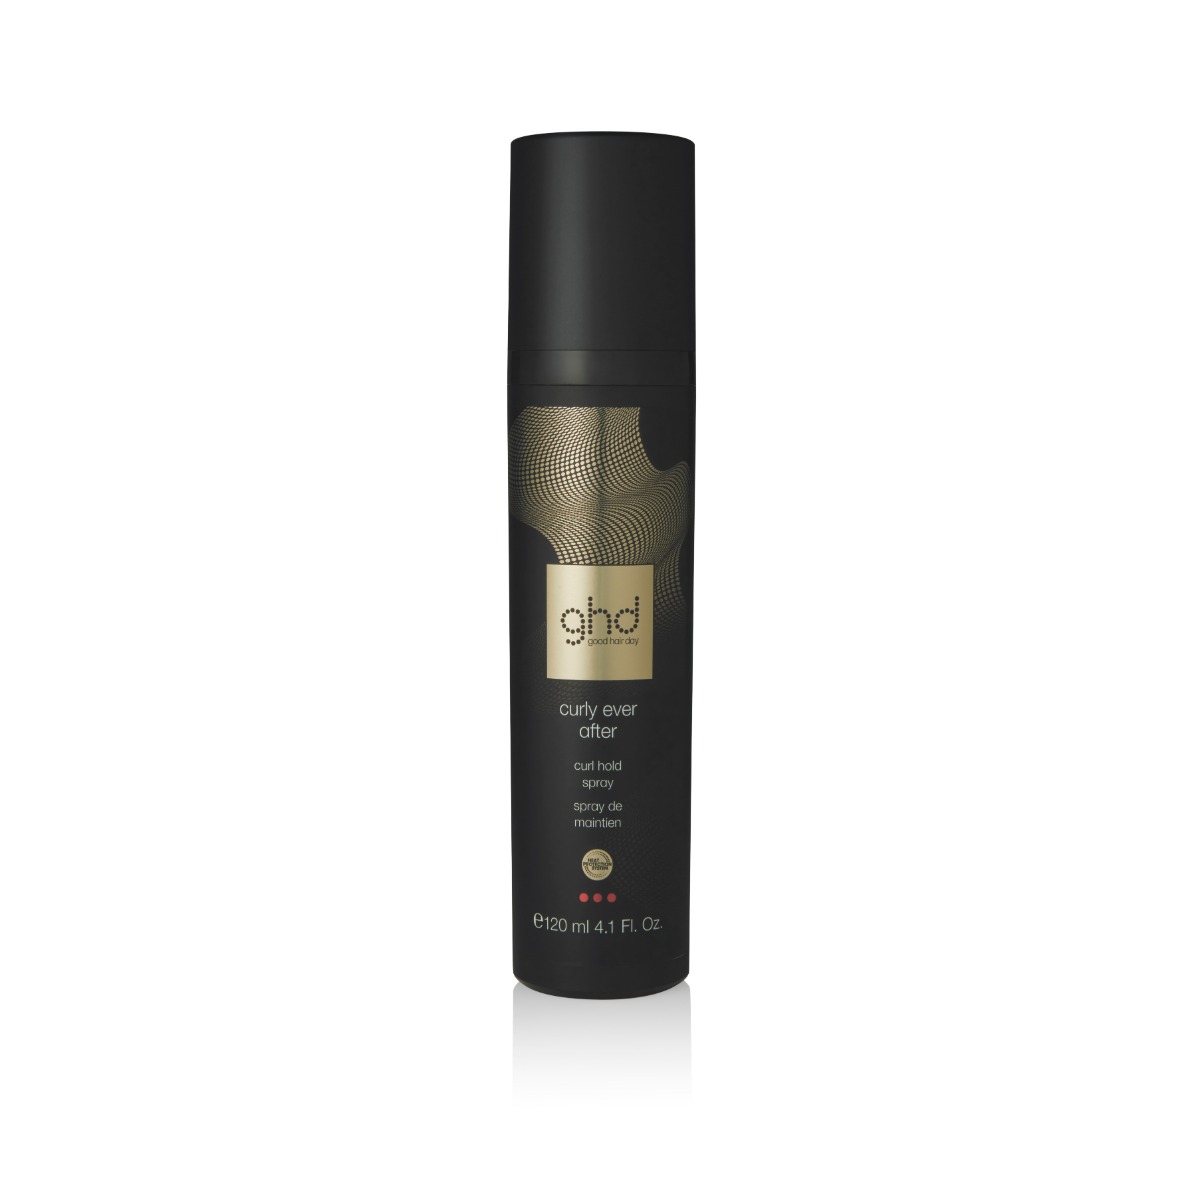 ghd Heat Protect Styling Curl Hold Spray - Styling crème